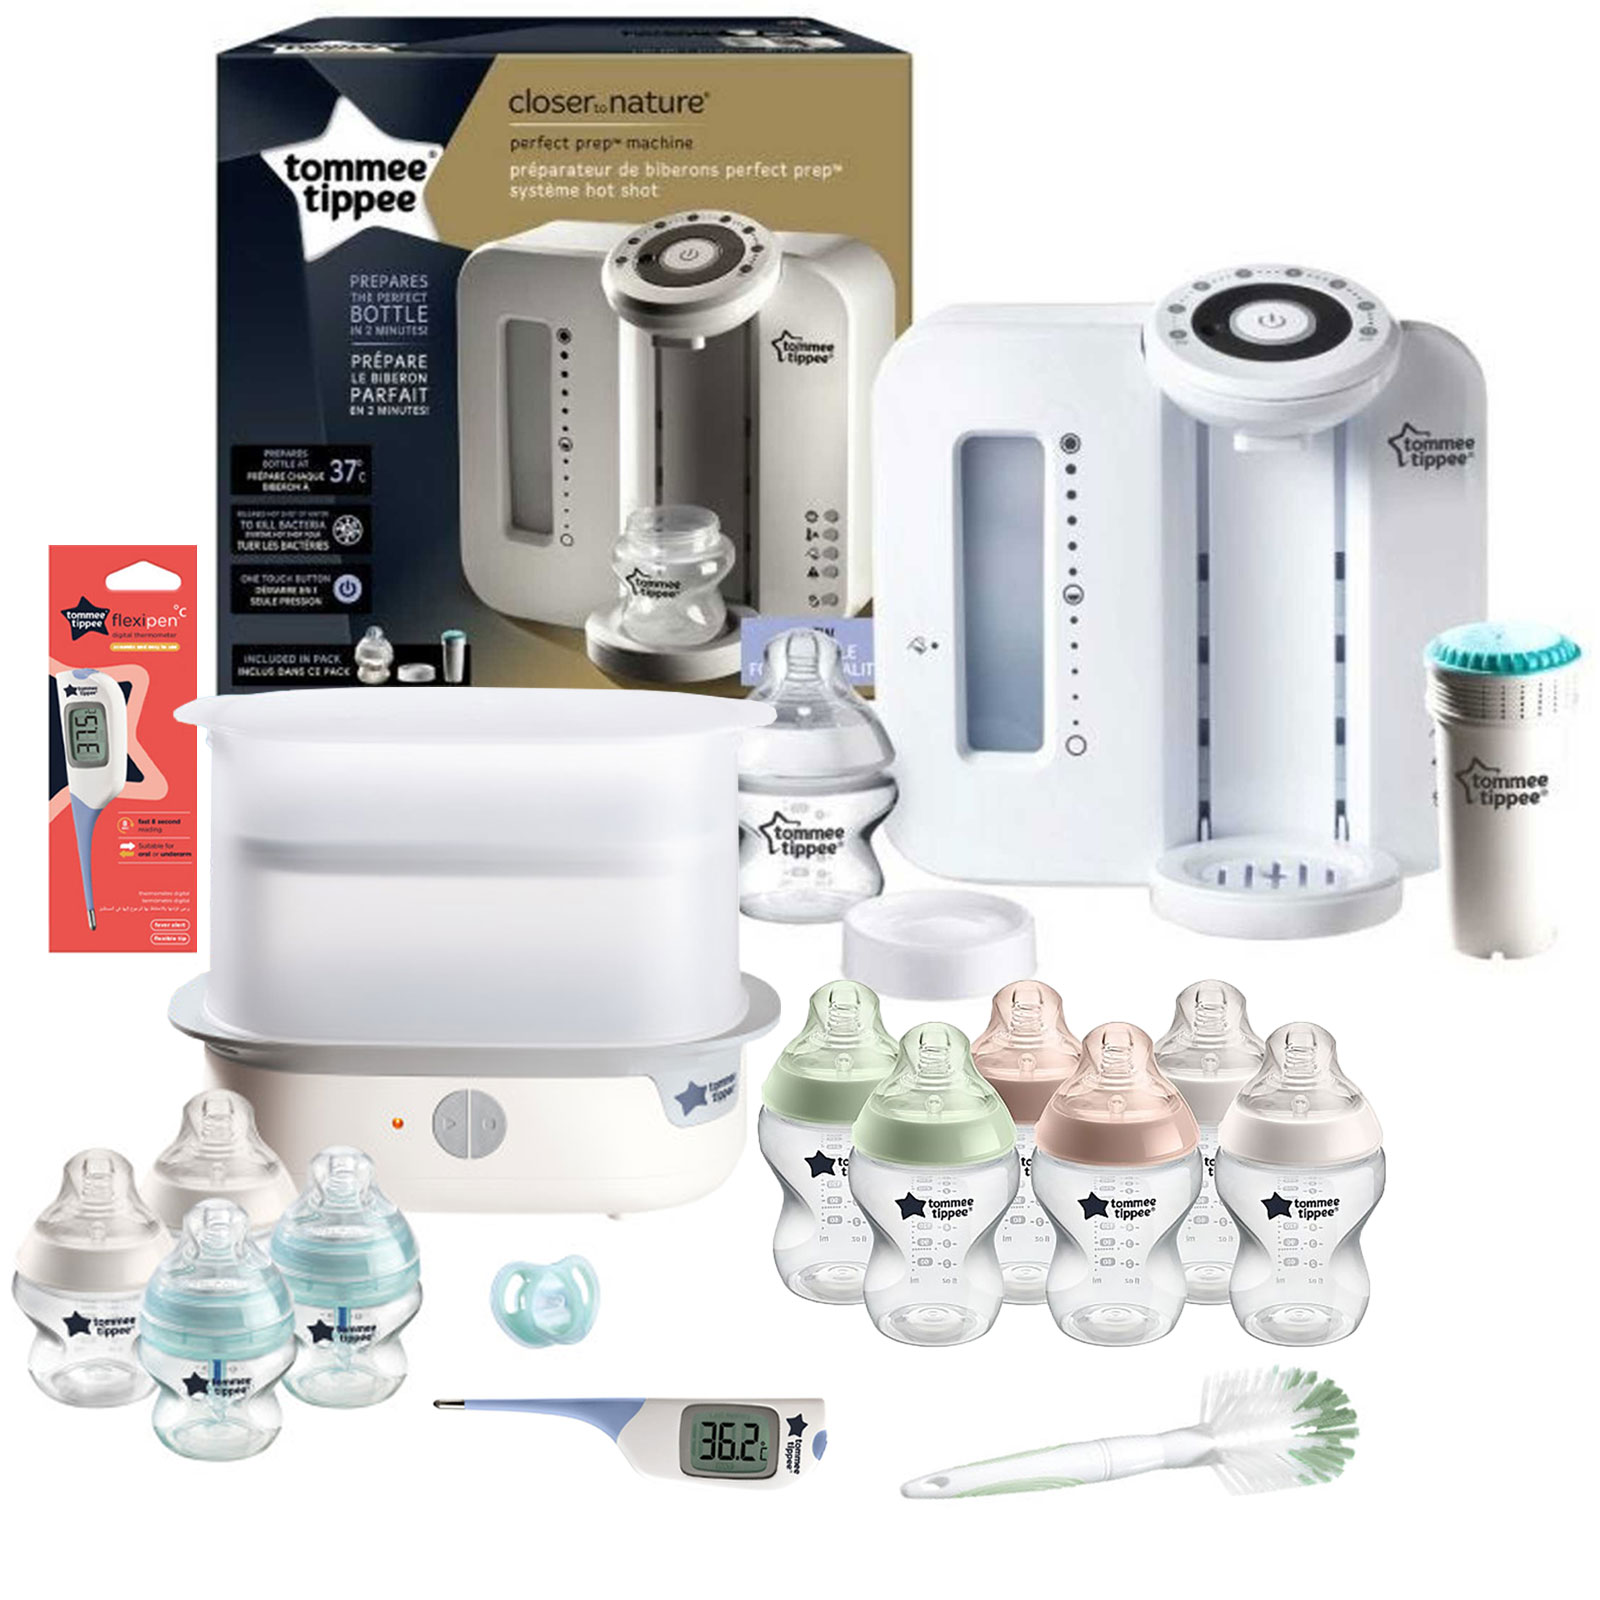 Tommee Tippee 16pc Perfect Prep Machine Complete Steriliser Baby Bottle and Thermometer Feeding Bundle - White / Natural